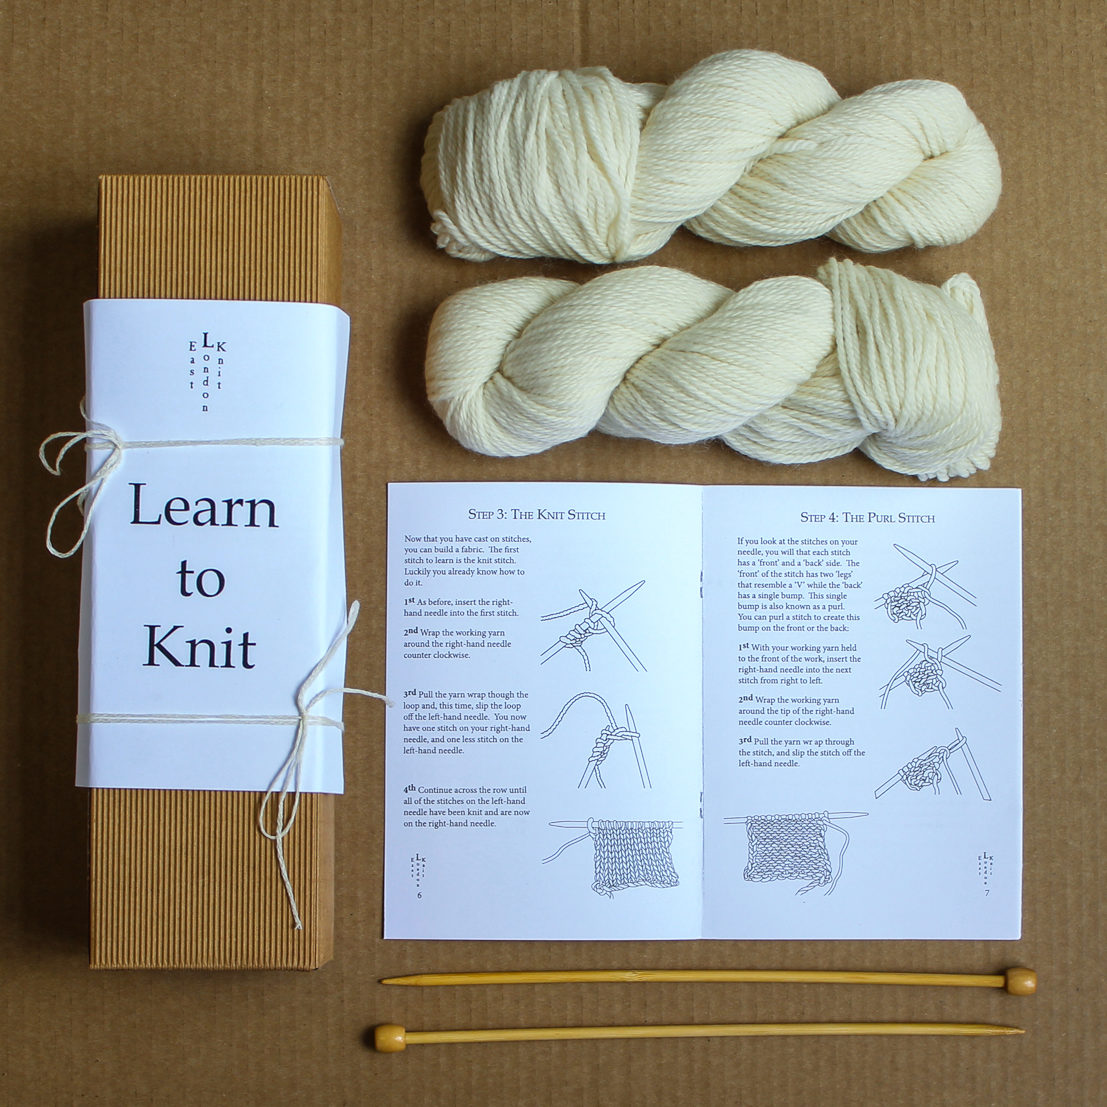 Knot A Knitter Knit Kit, Complete Beginner Knit Kit, Get Started With  Knitting, Everything You Need to Learn Knit, Stockinette, Rib and Moss -   UK